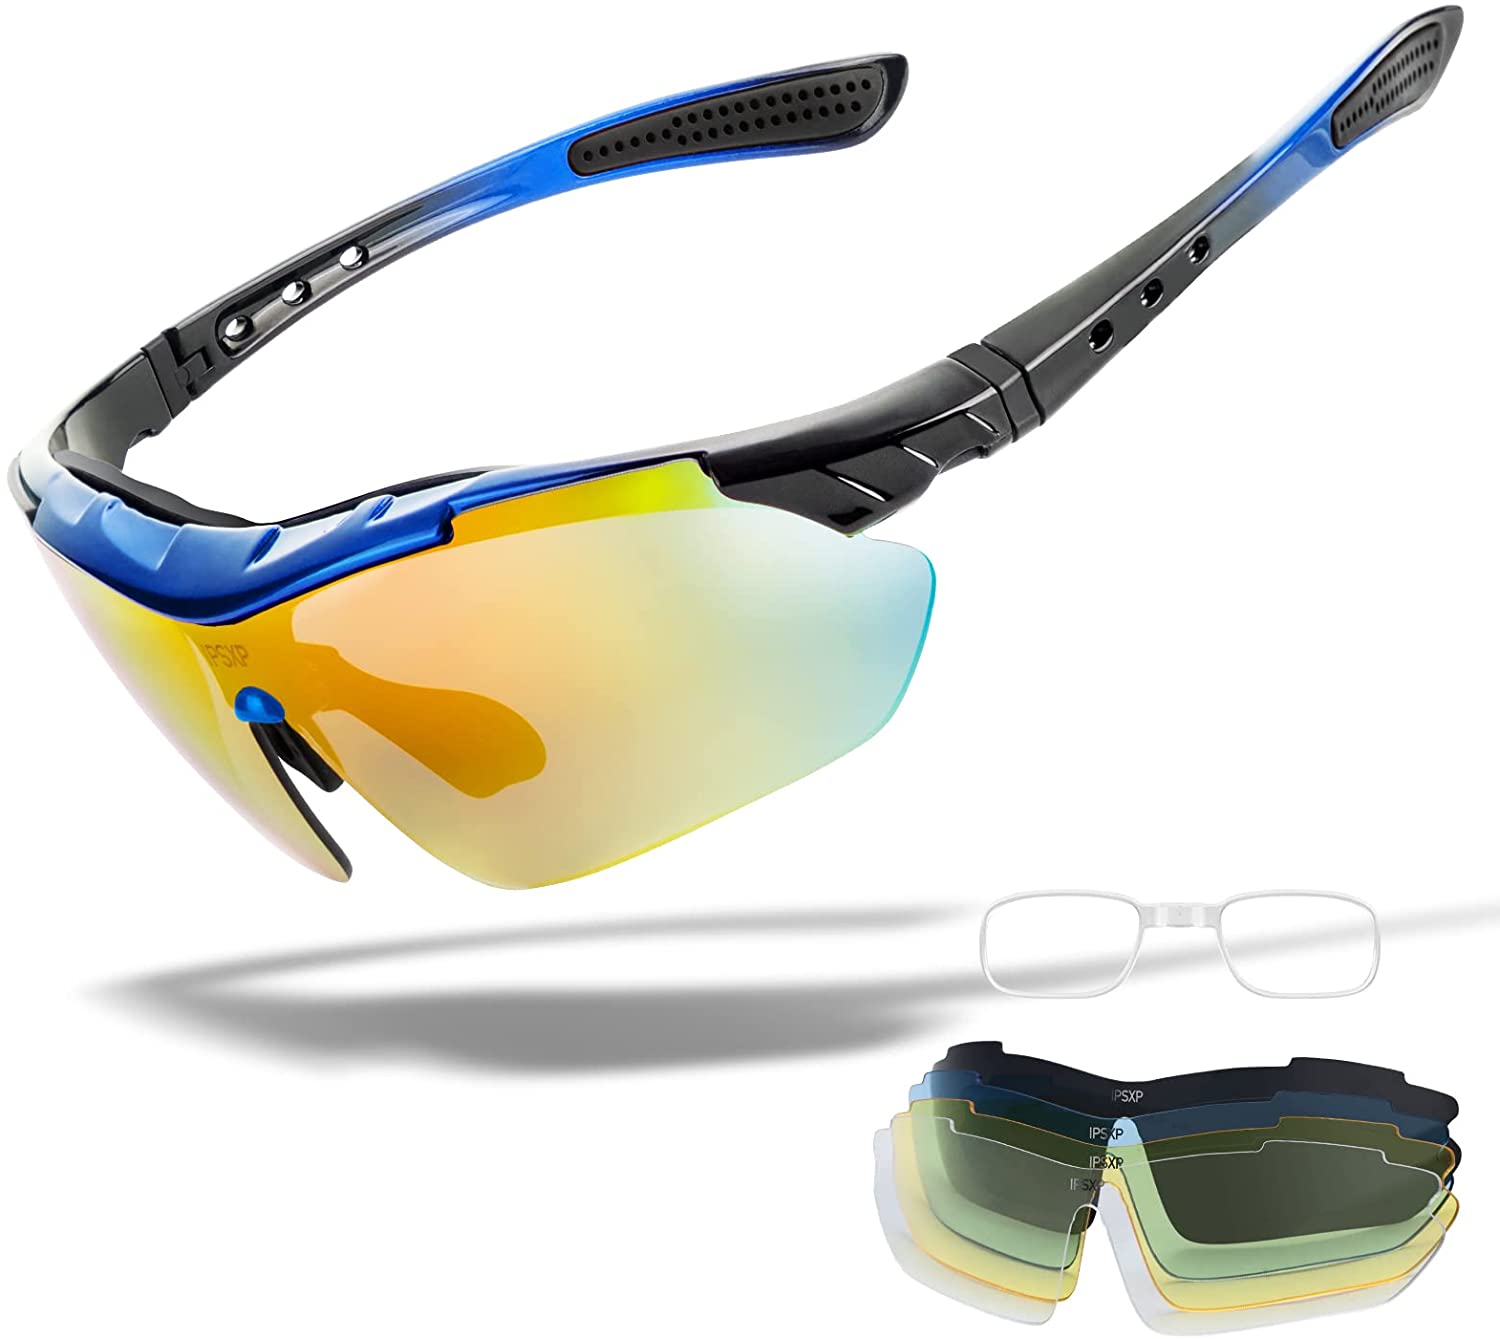 Polarized Sports Sunglasses Cycling Glasses for Men Women with 5 Interchangeable Lenses for Cycling Running Hiking